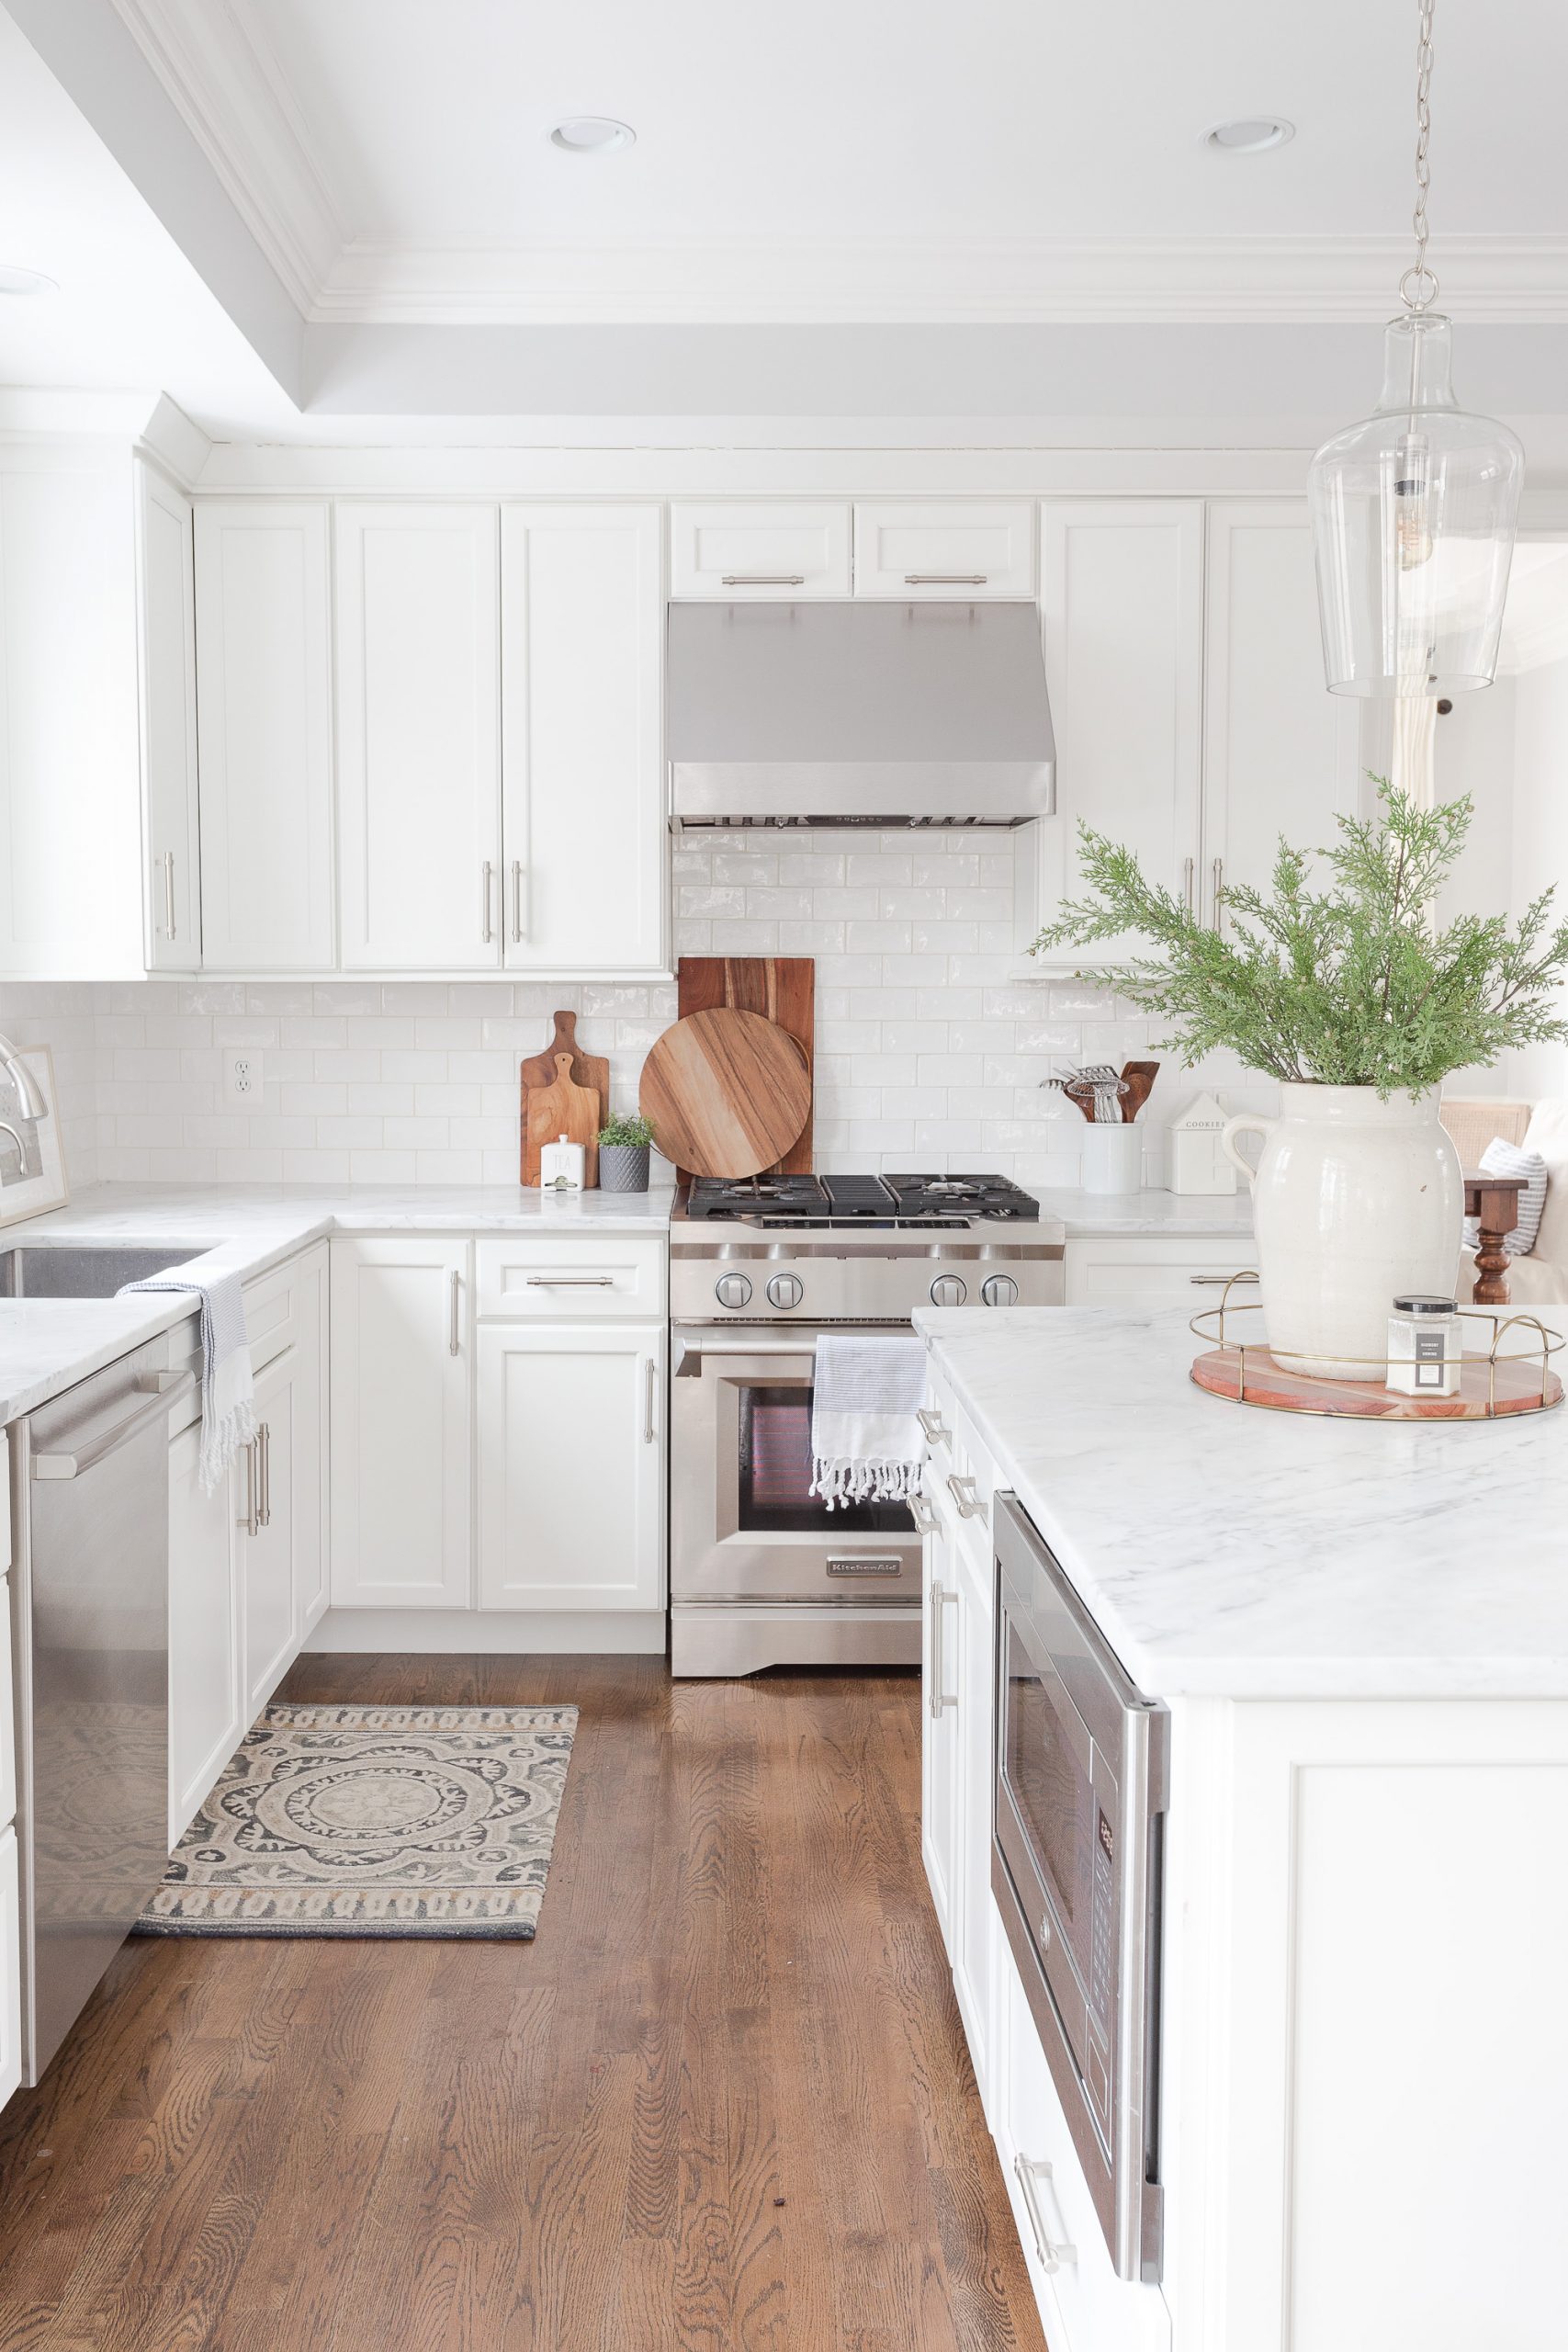 marble kitchen countertops in a white kitchen with stainless steel gas range and microwave in the island